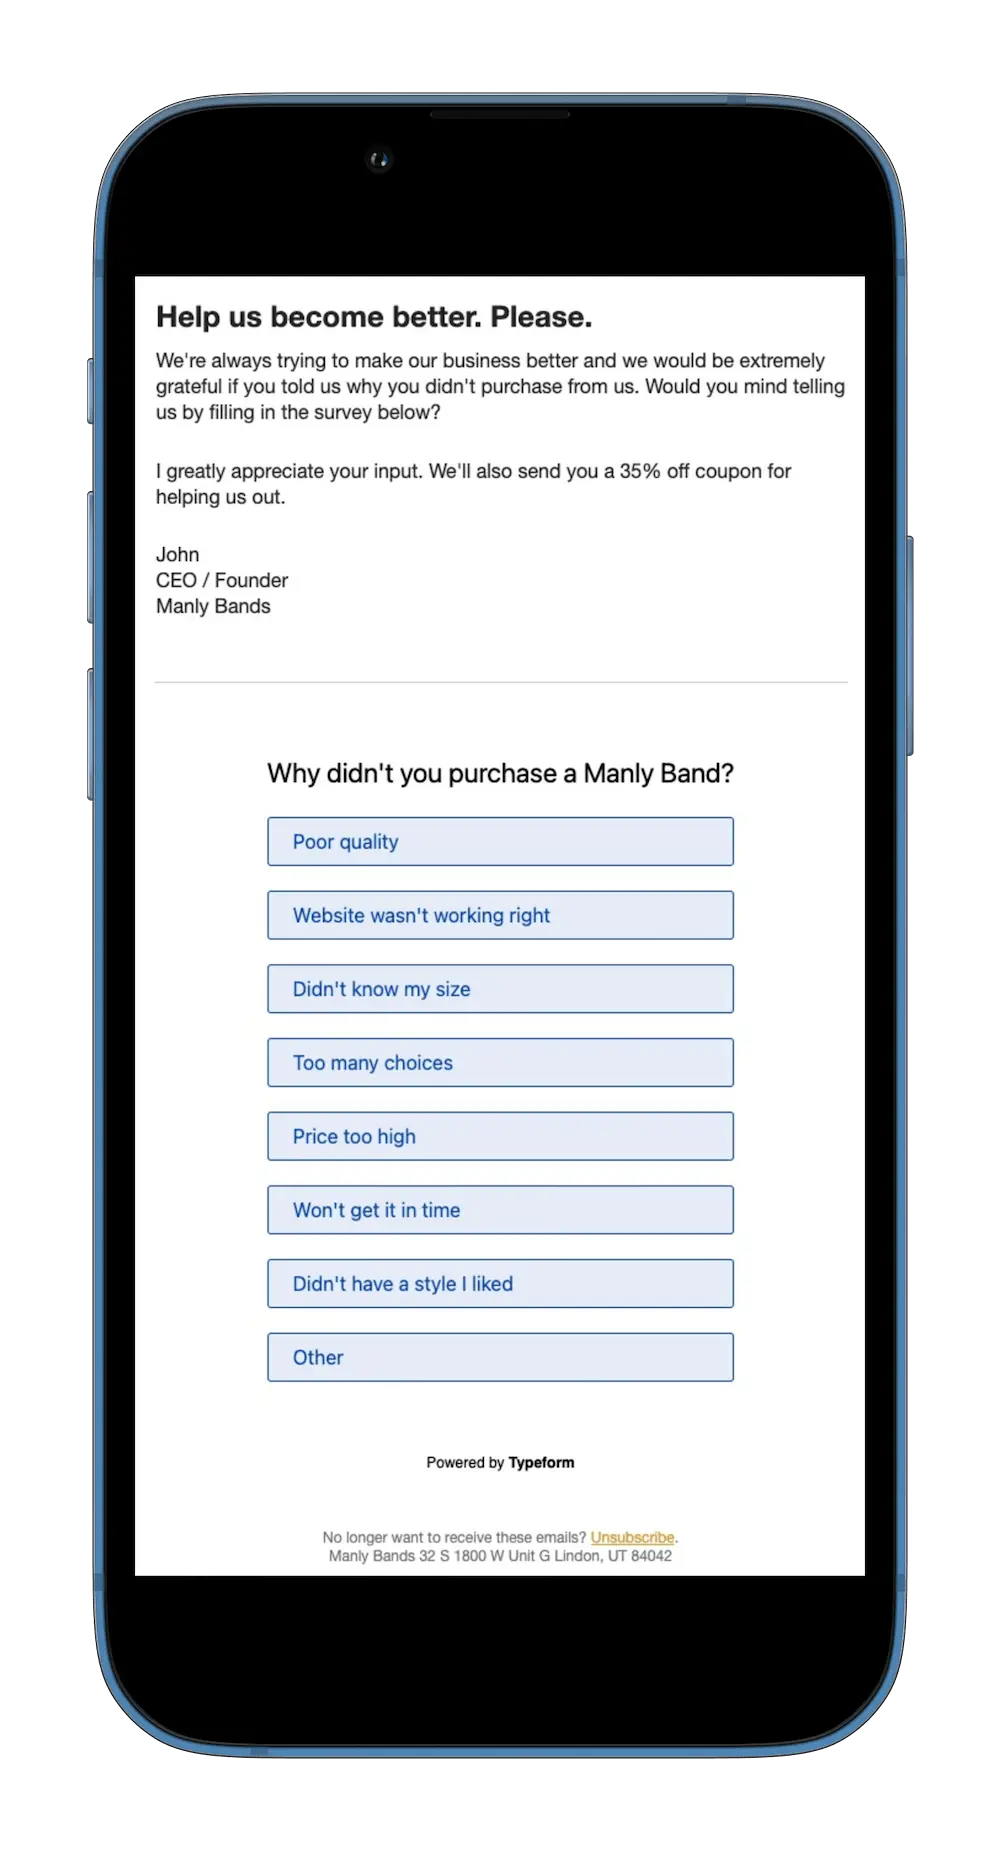 Image shows an abandoned cart email from Manly Bands that includes a survey asking why the shopper didn’t buy.